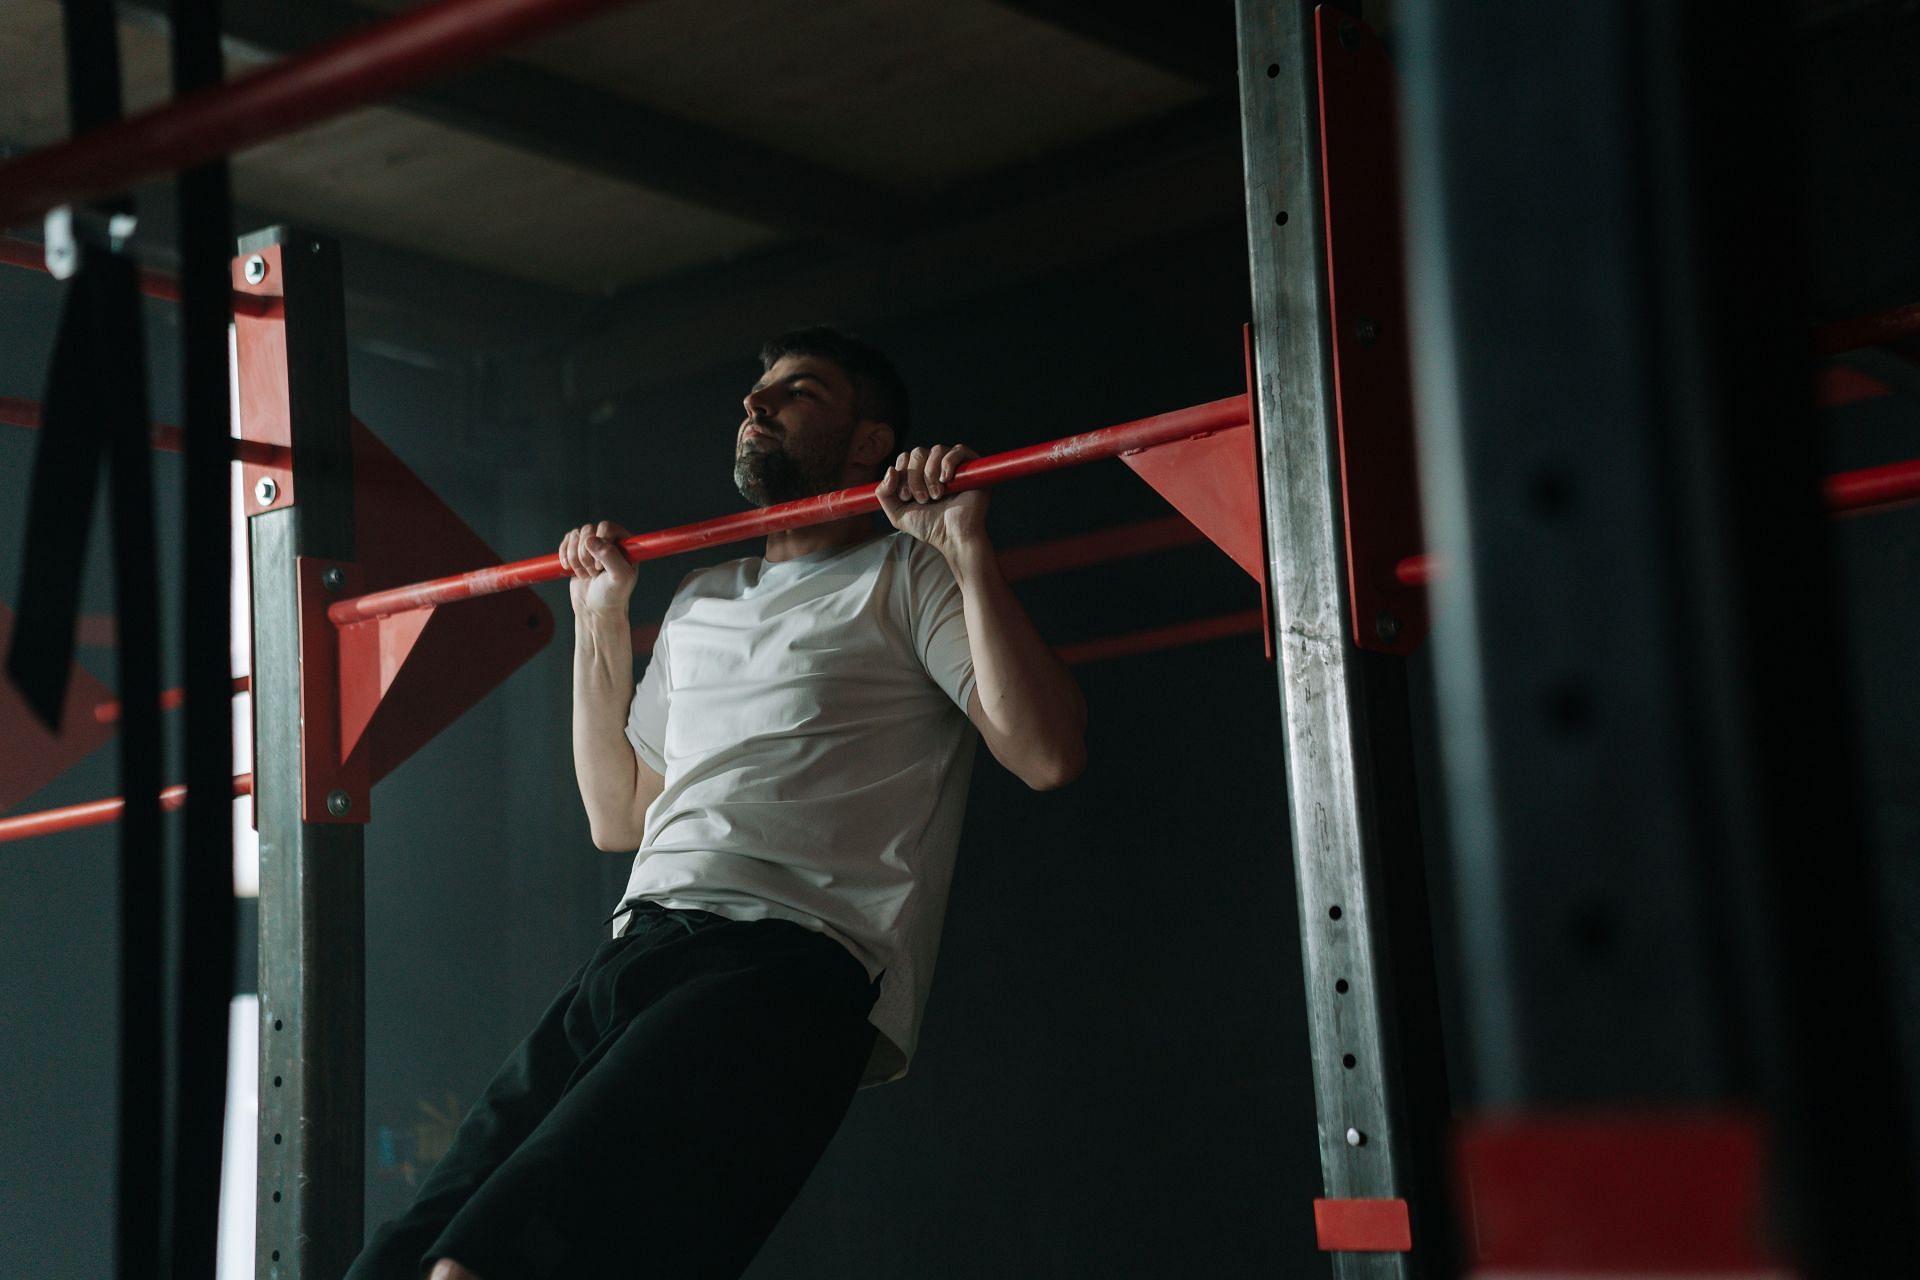 Why are pullups so hard? (Image via Pexels/ Ron Lach)